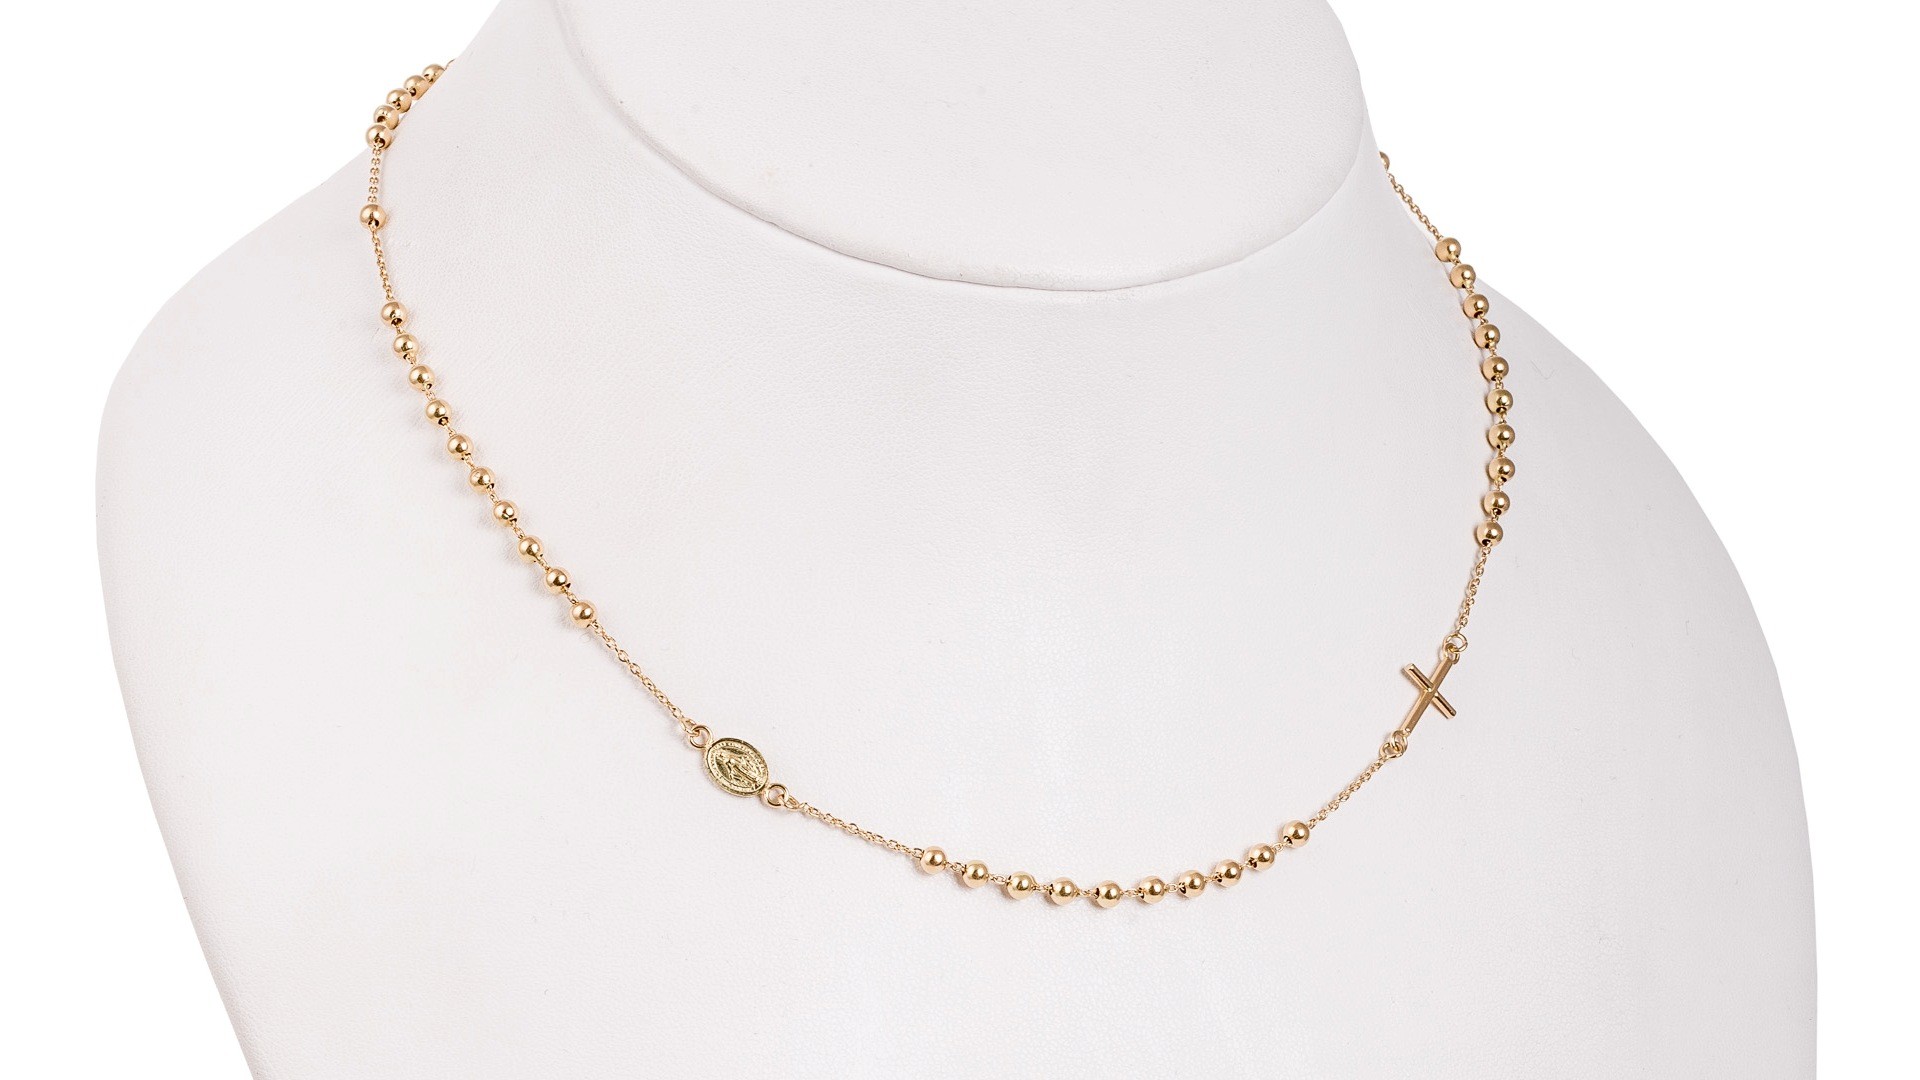 gold necklace with church-inspired details